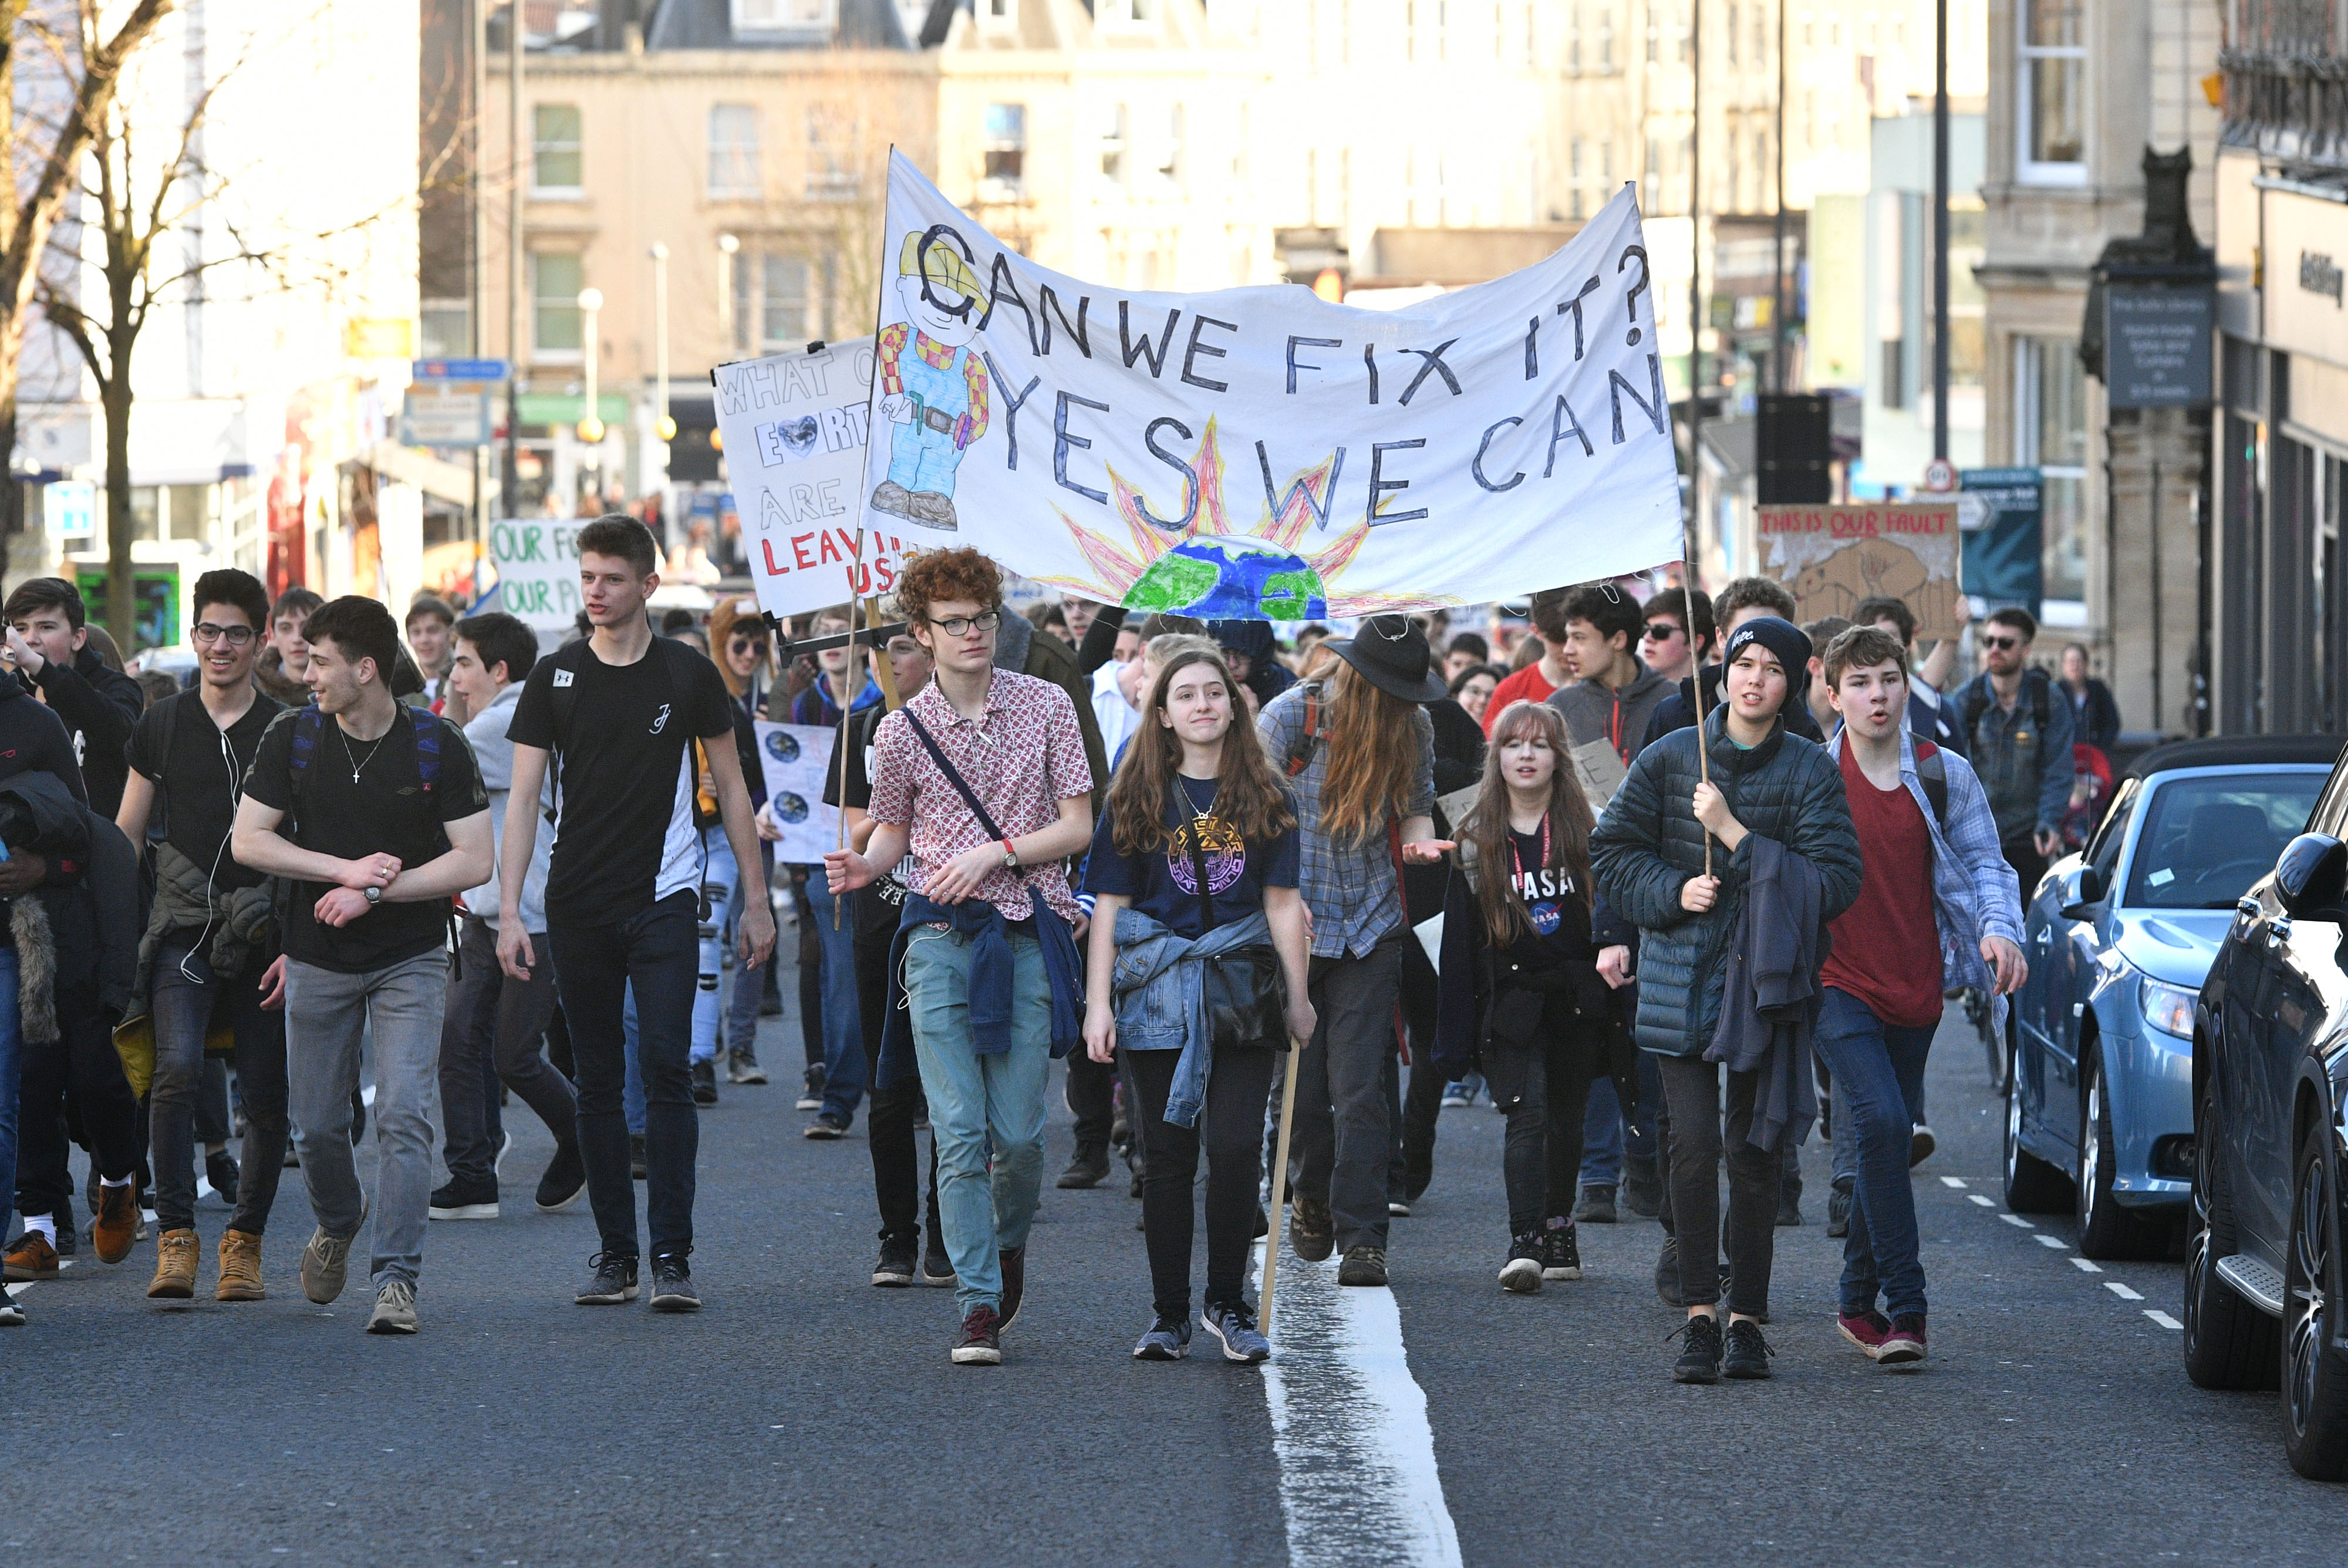 Demonstrators during a climate change protest in Bristol